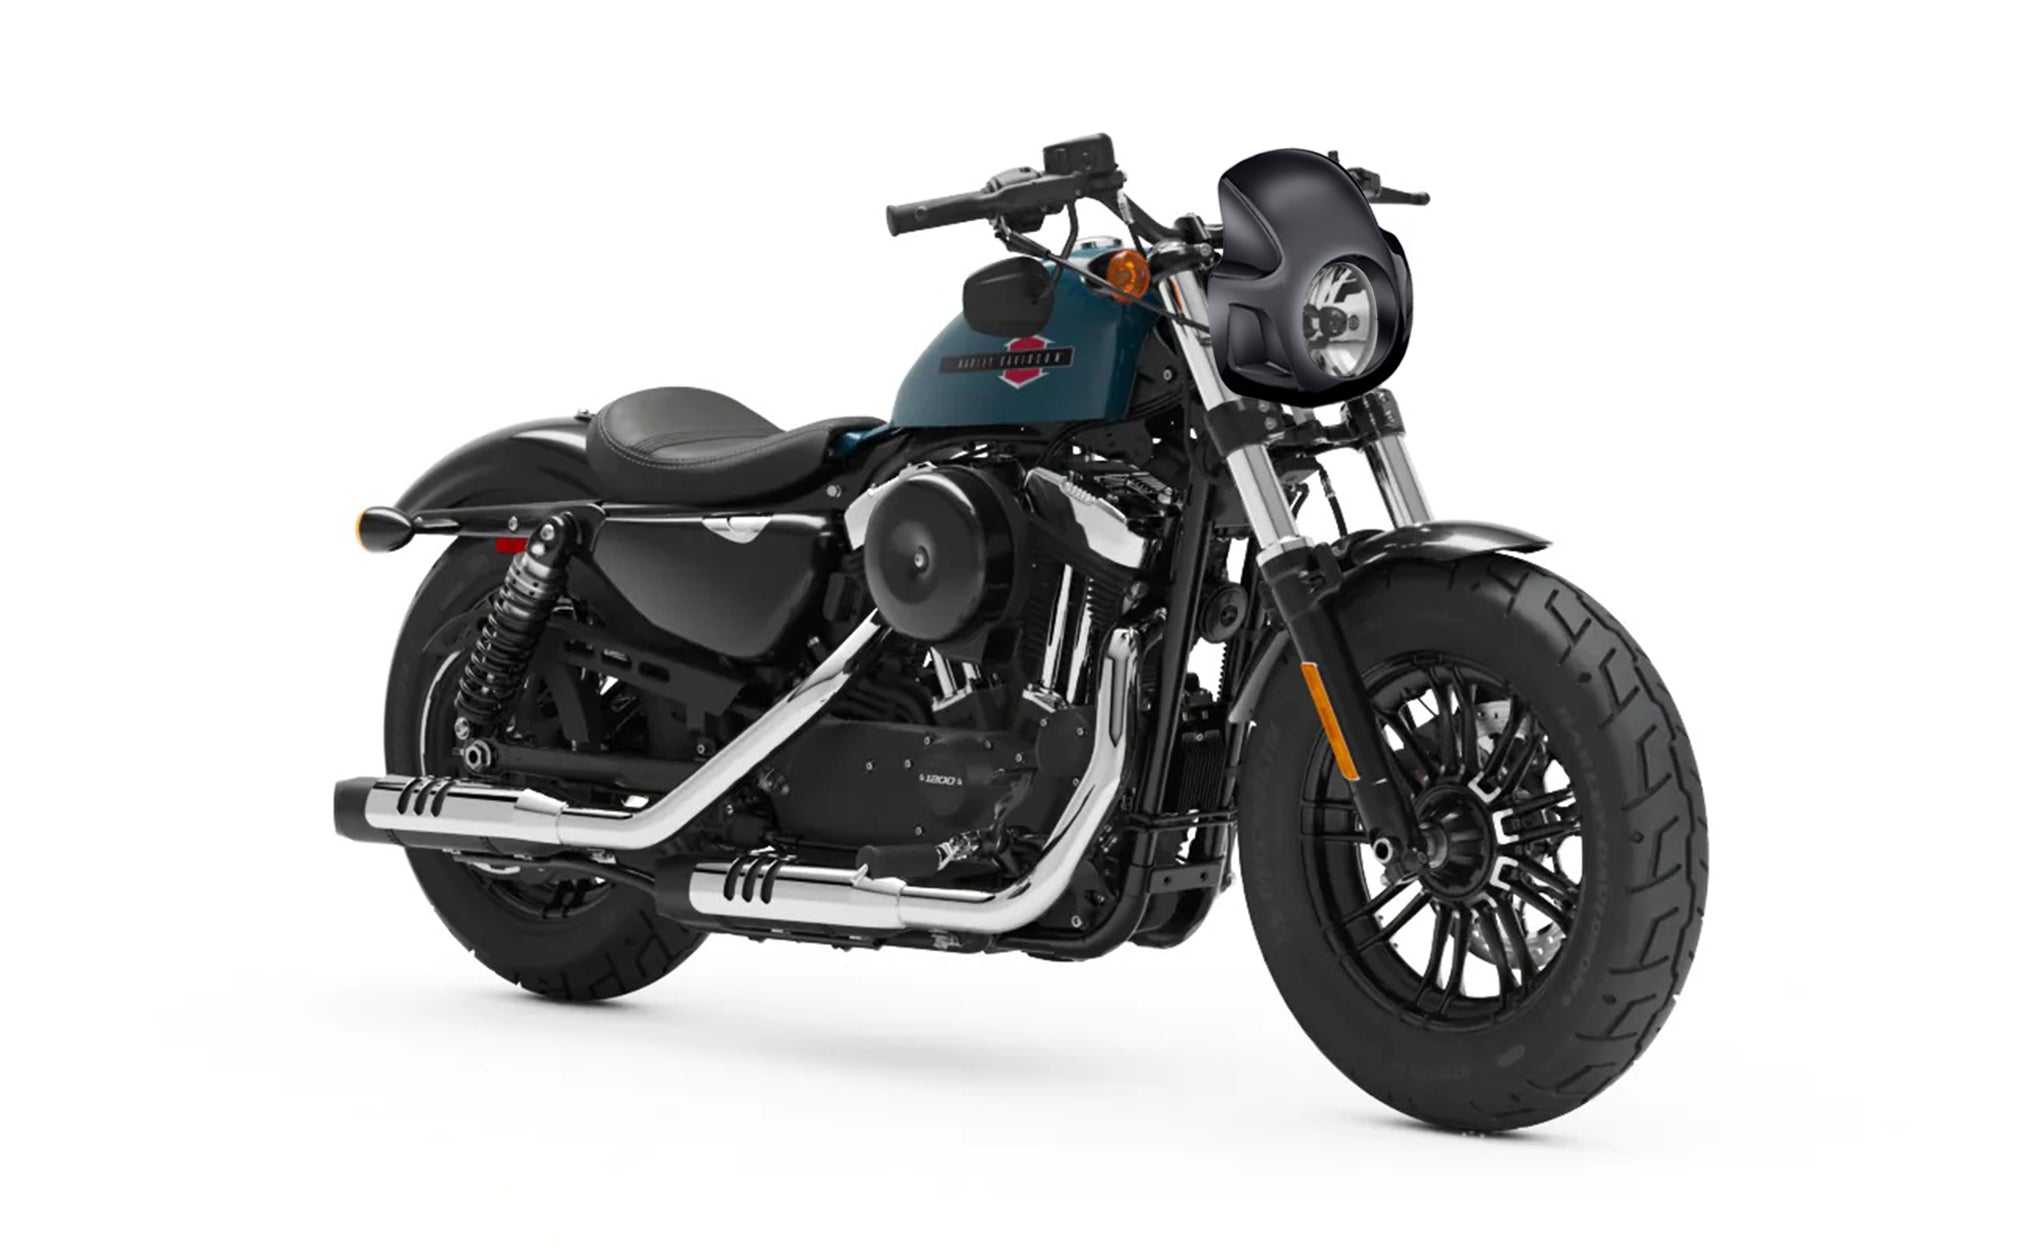 Viking Strider Sport Motorcycle Fairing For Harley Sportster Forty Eight Gloss Black Bag on Bike View @expand